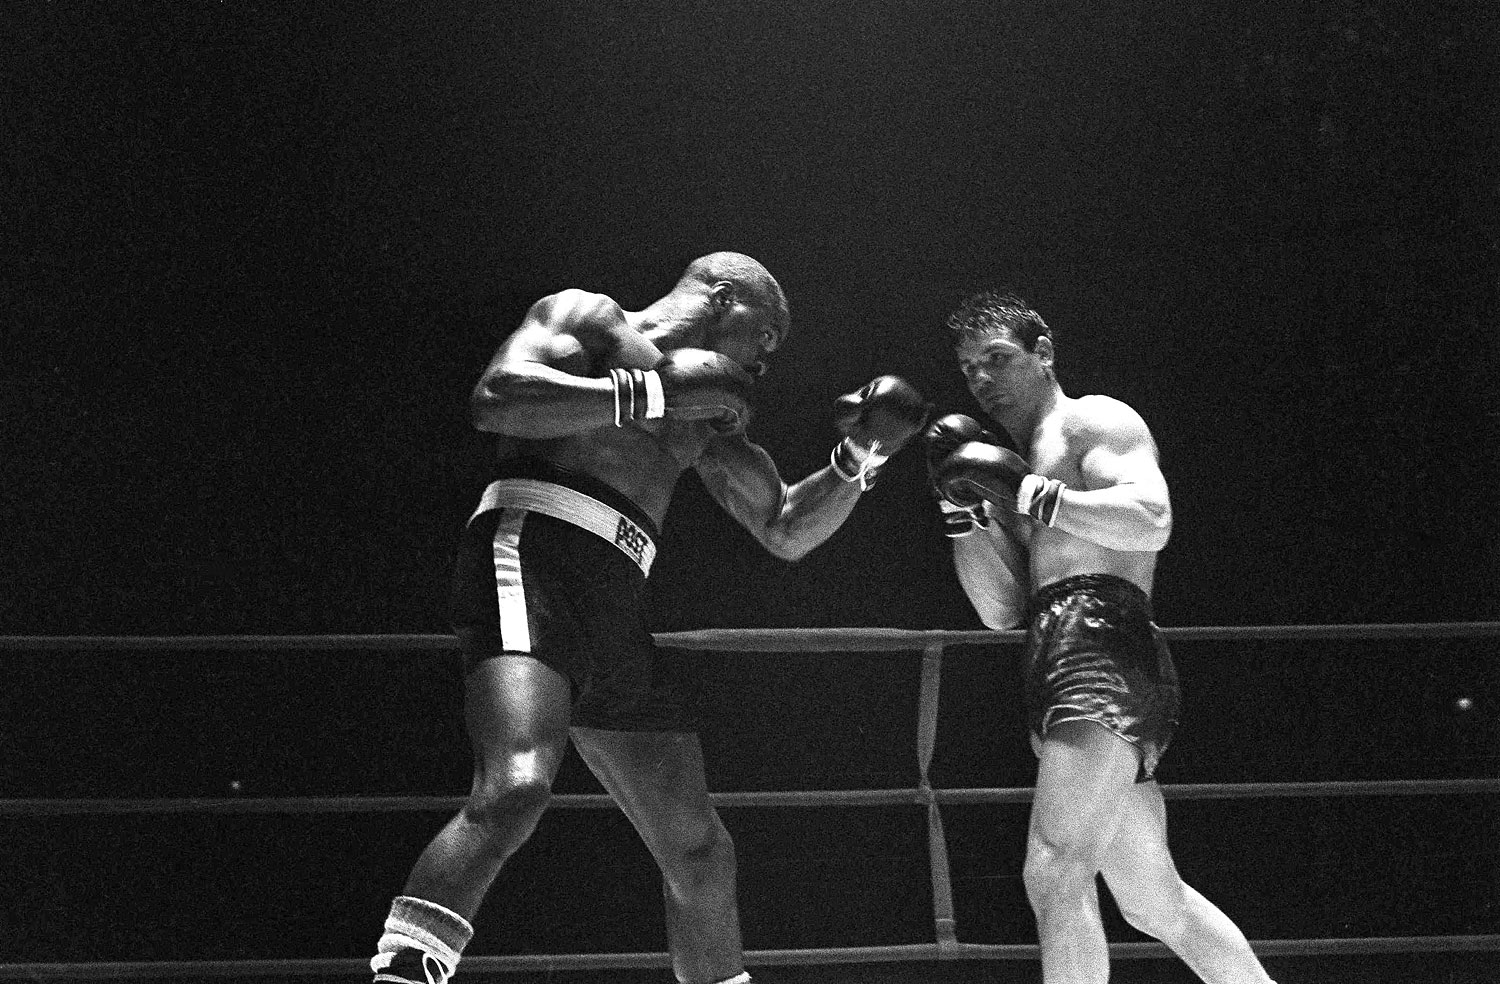 Rubin  Hurricane  Carter, left, knocks out Italian boxer Fabio Bettini in the 10th and last round of their fight at the Falais Des Sports in Paris, Feb. 23, 1965.